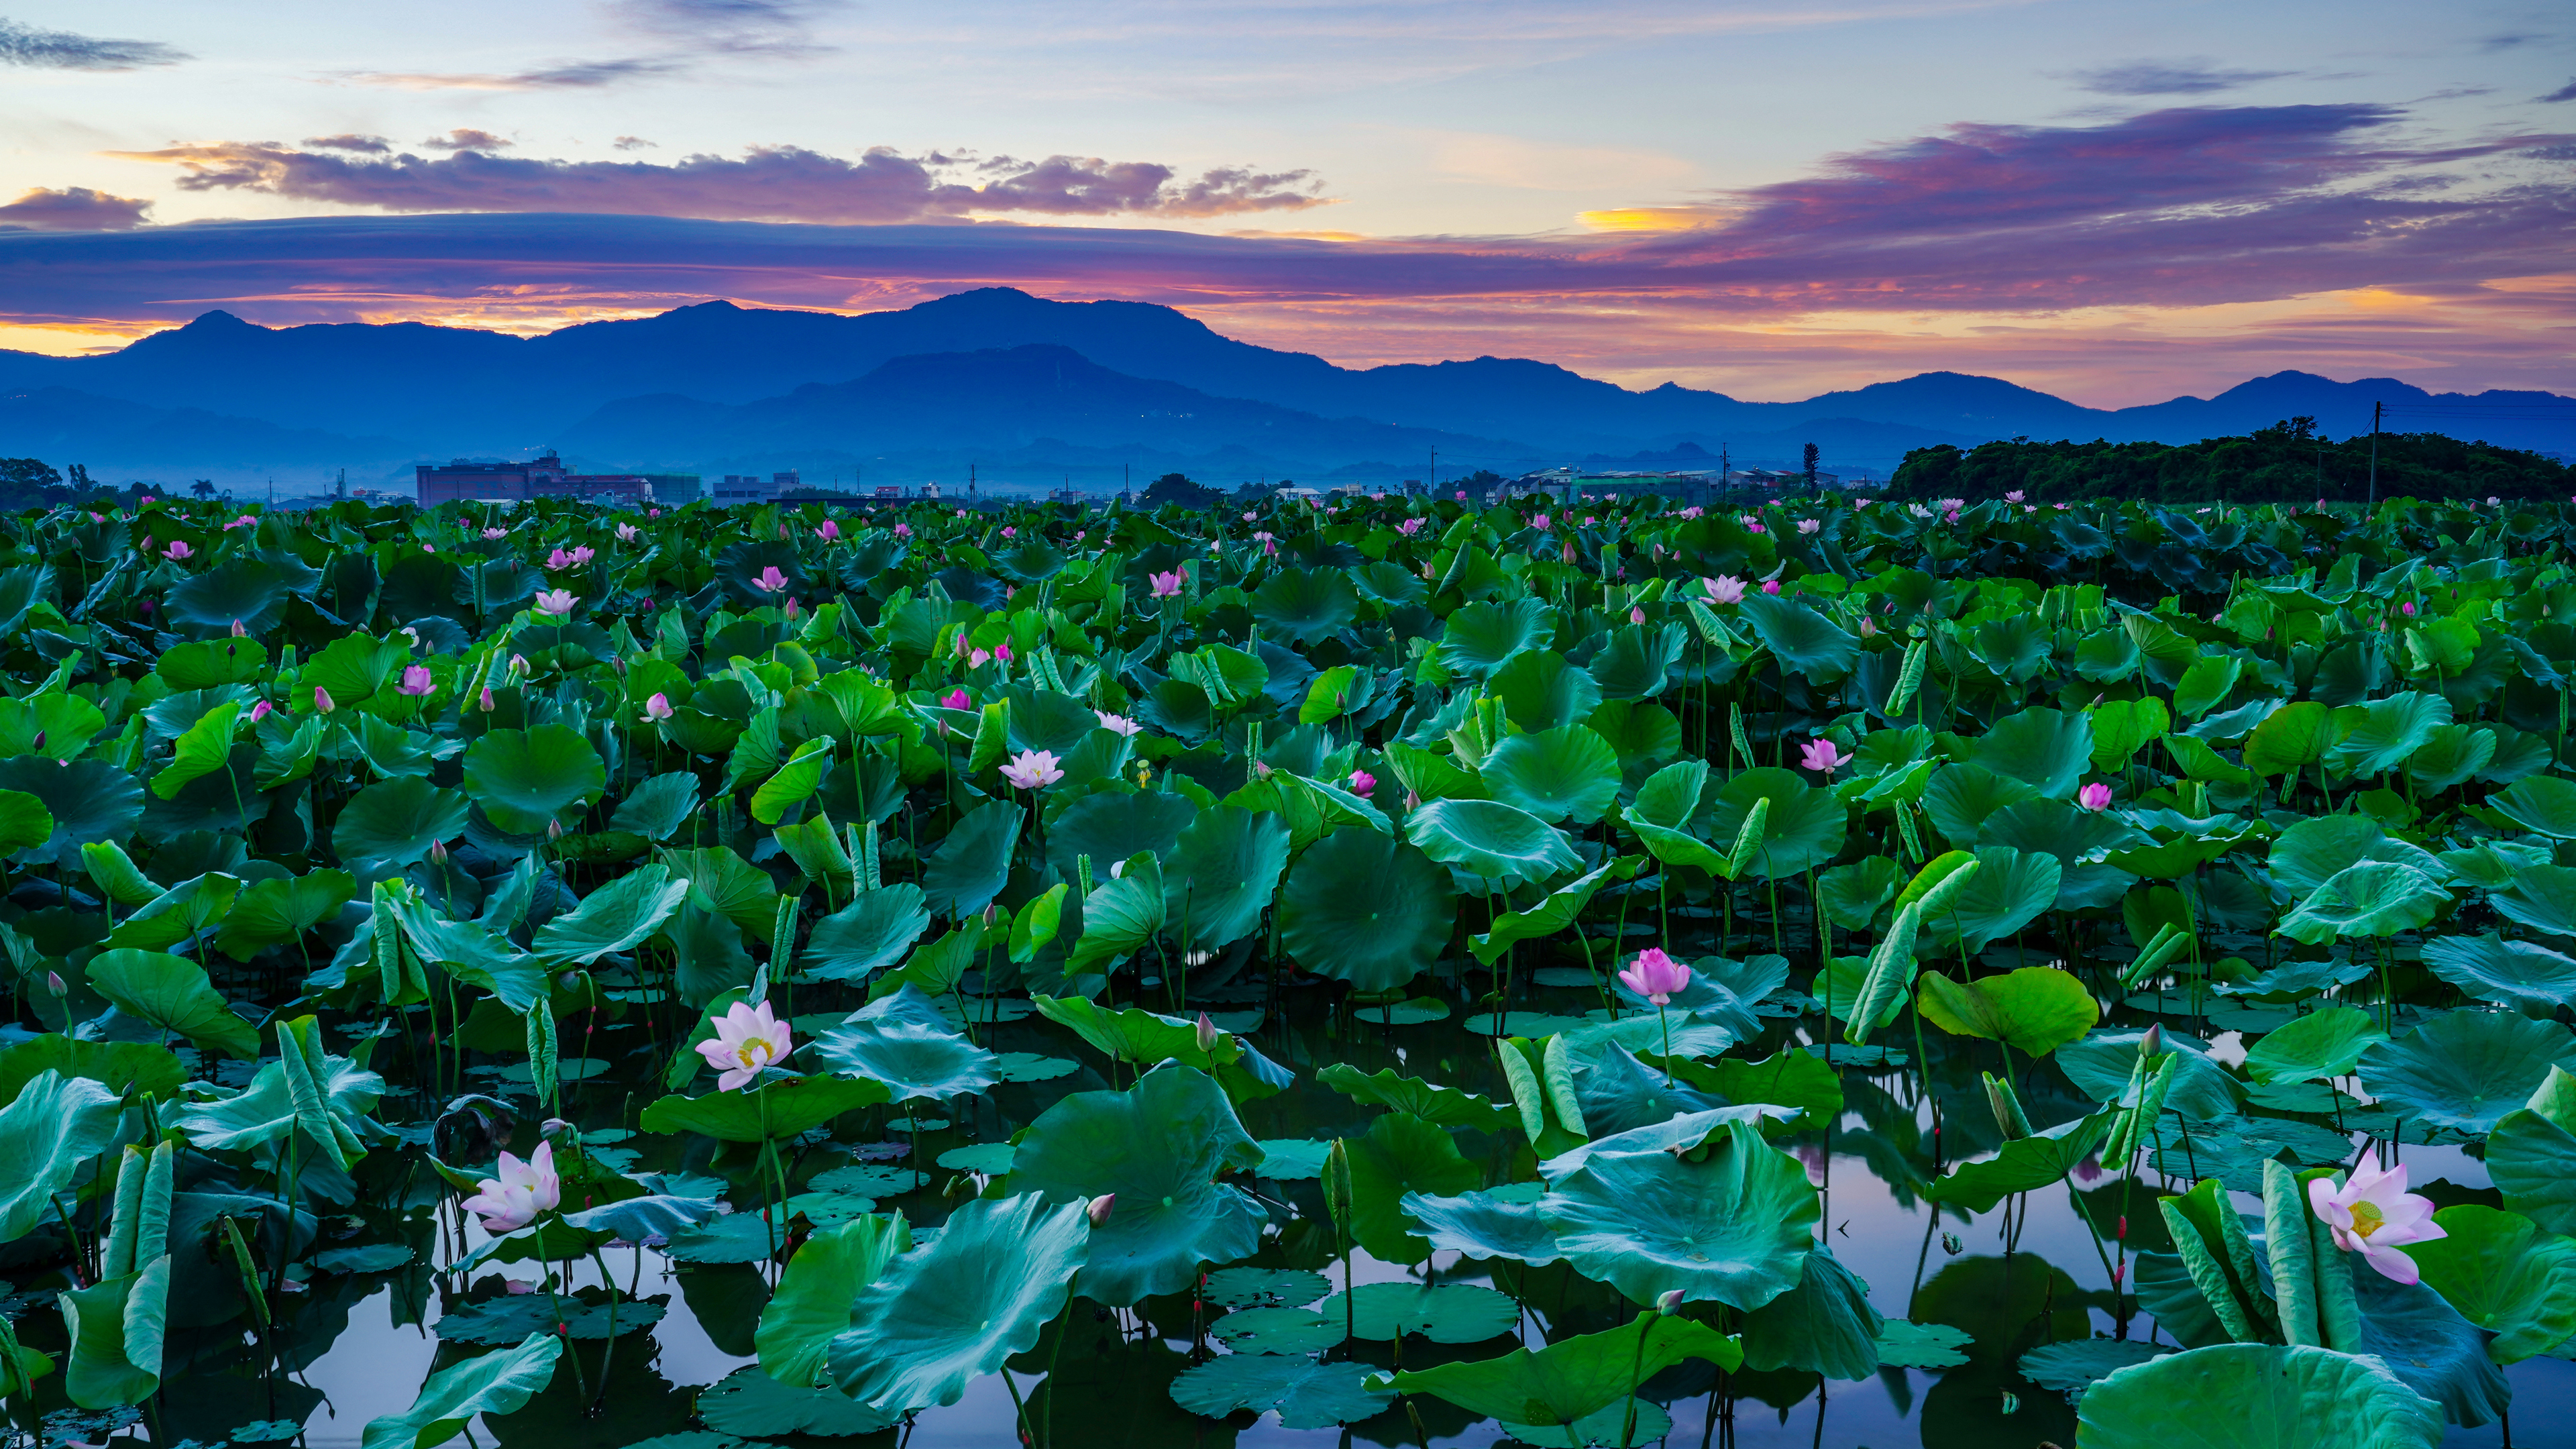 Lily Pads Sunset Landscape Nature Flowers Mountains Sunset Glow Clouds Water Reflection 3840x2160